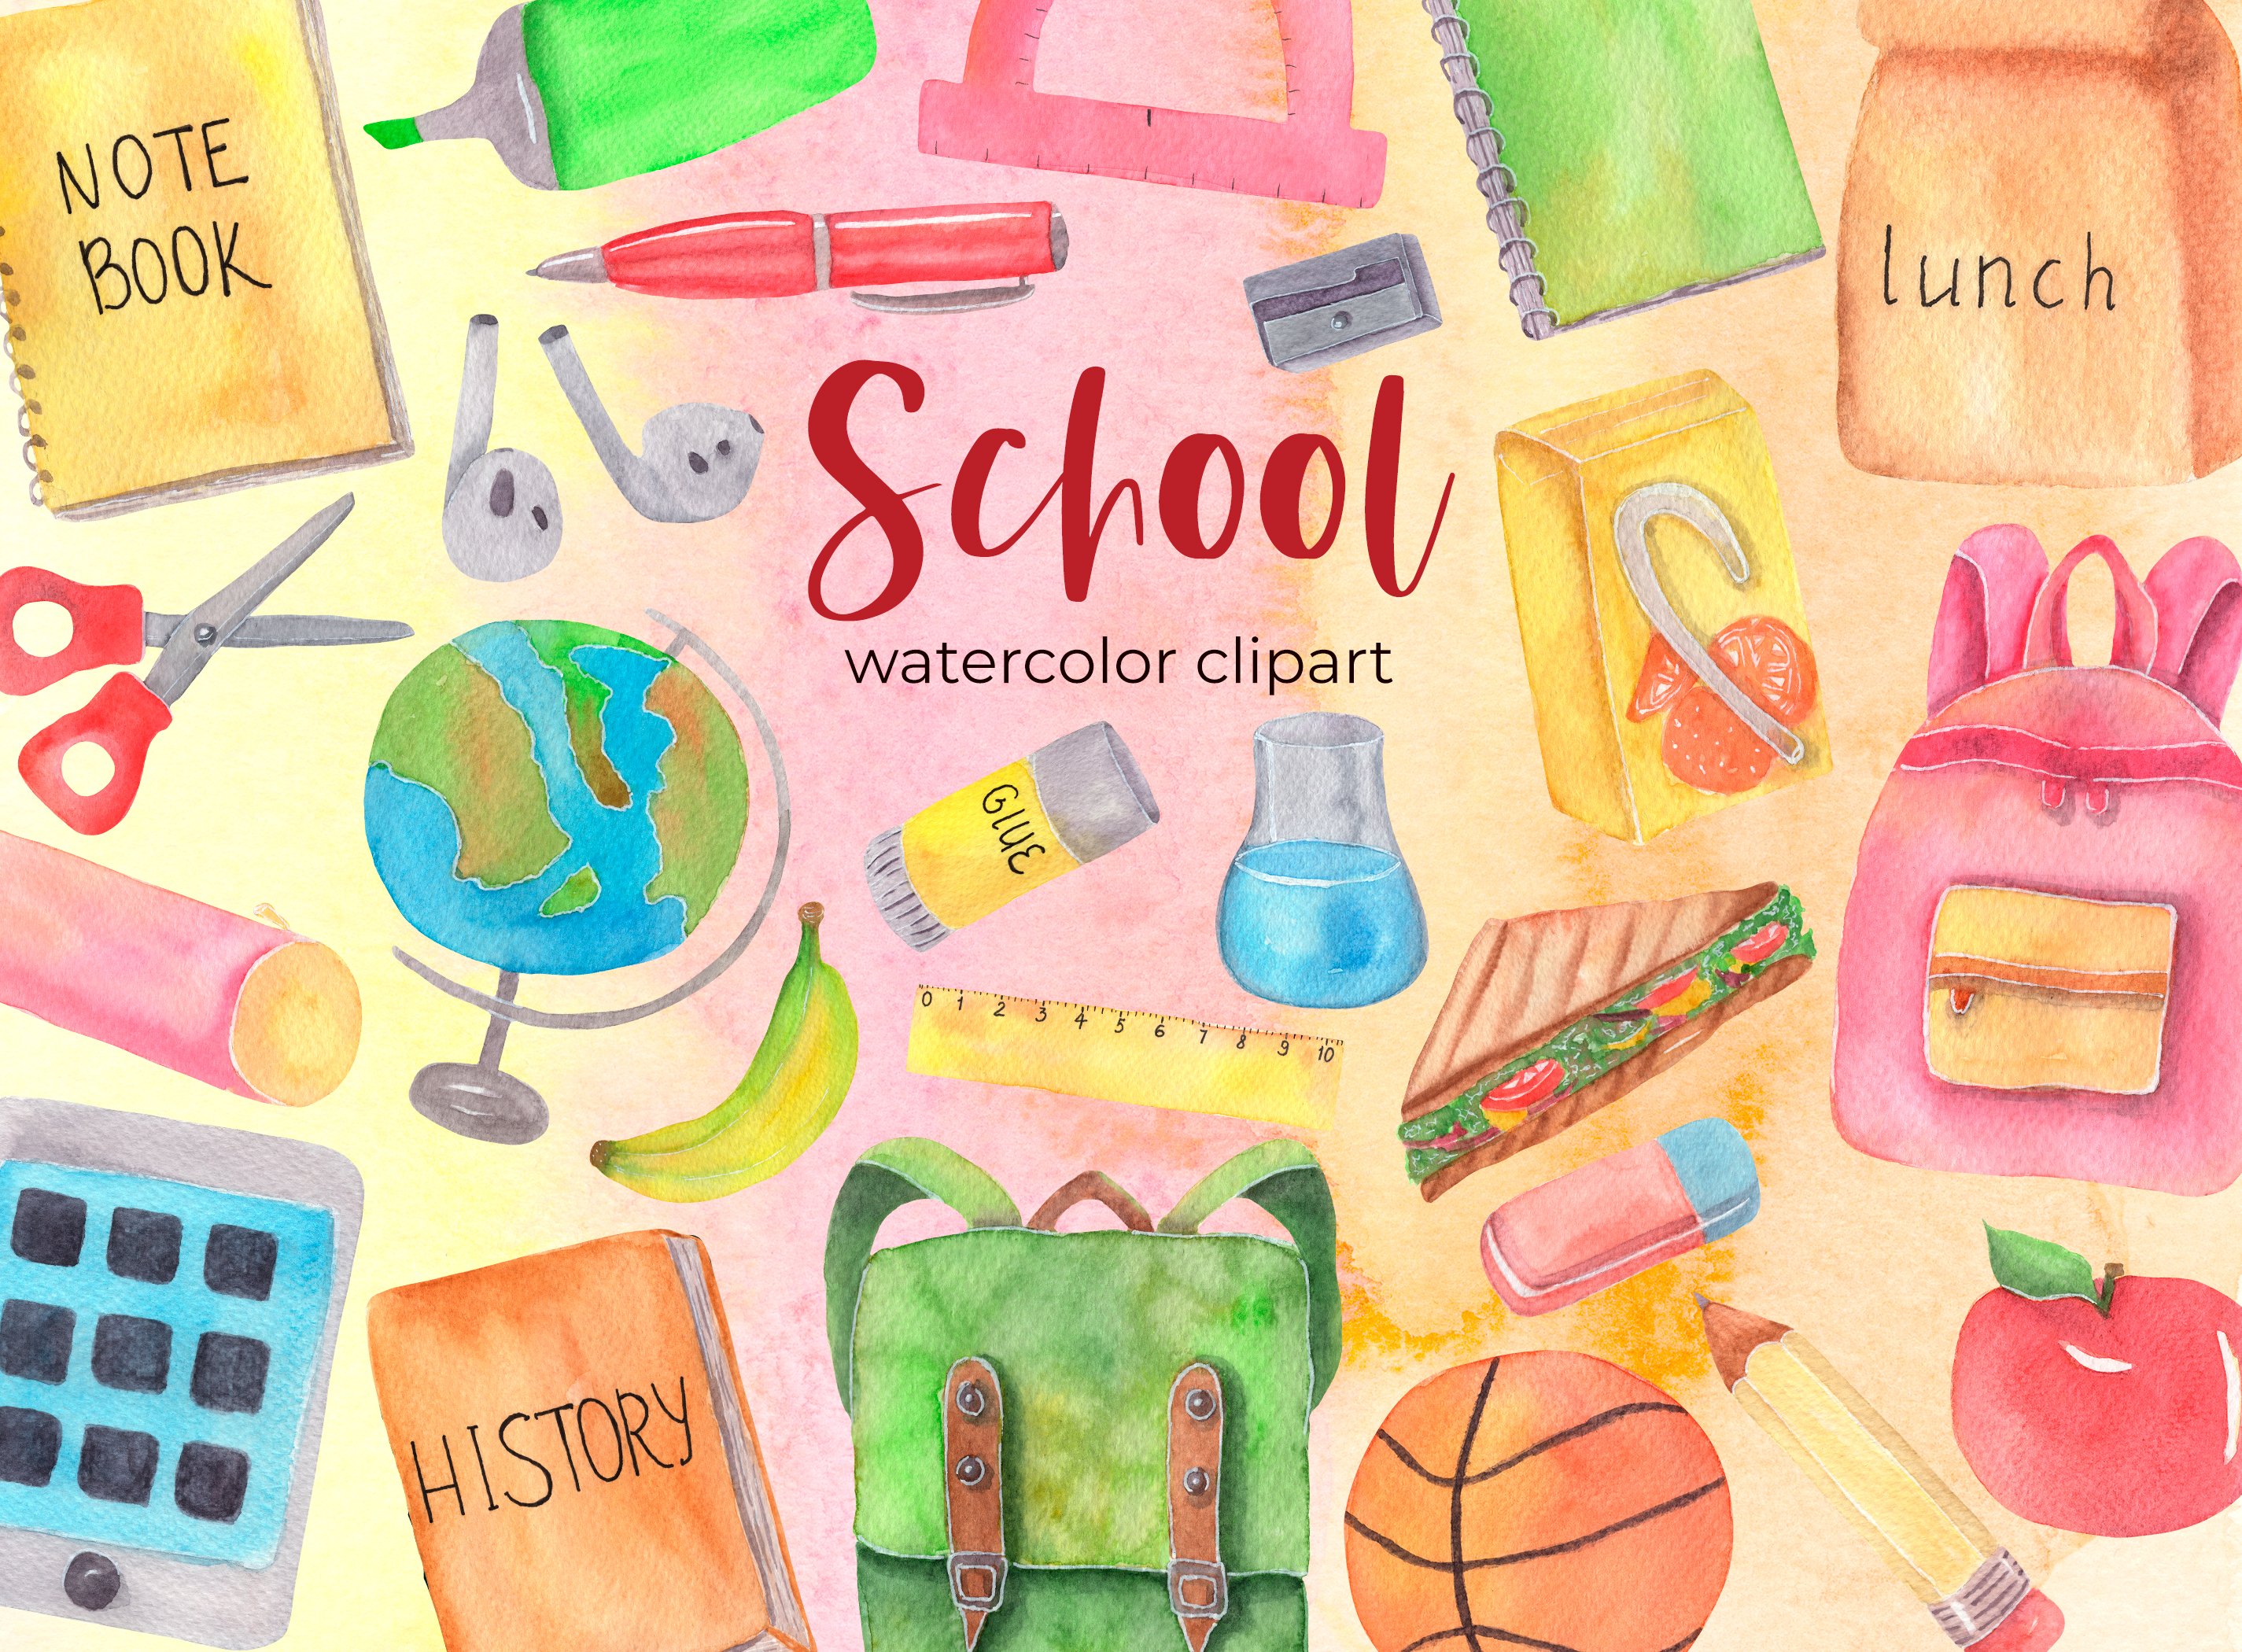 School supplies watercolor clipart cover image.